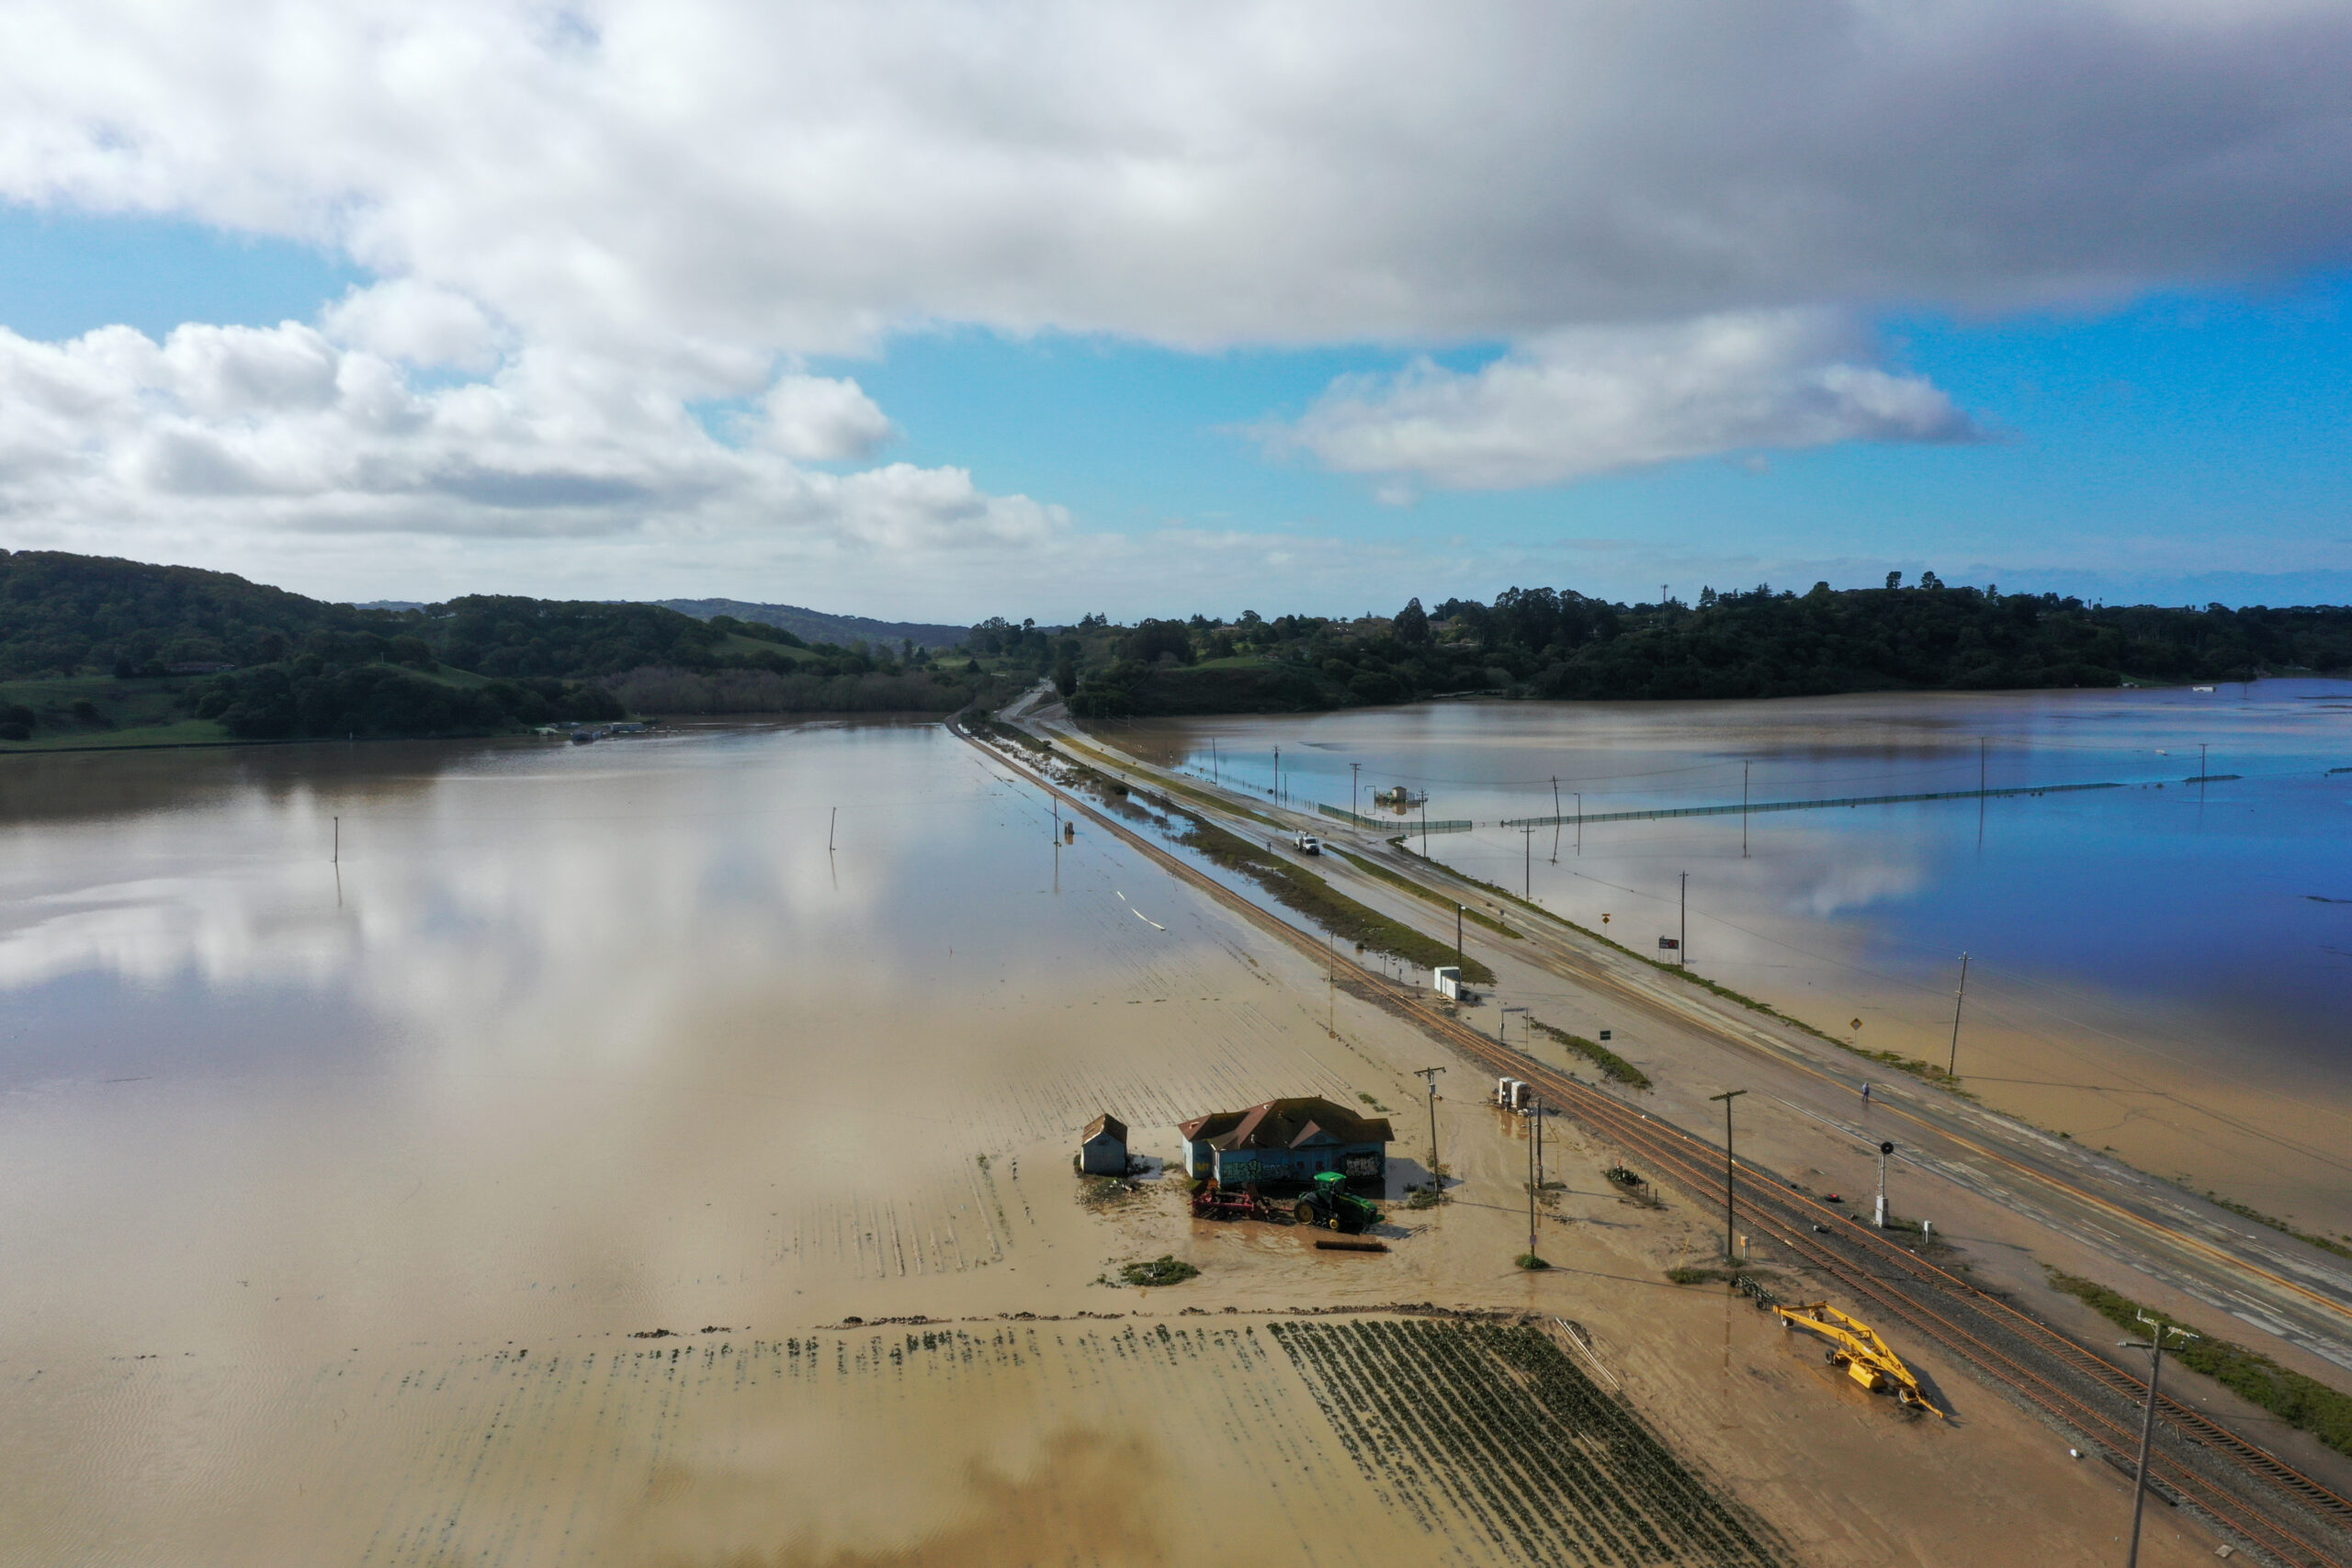 An aerial view shows the aftermath of flooding in the Pajaro Valley of Monterey County as atmospheric river storms hit California in March 2023. Credit: Tayfun Coskun/Anadolu Agency via Getty Images